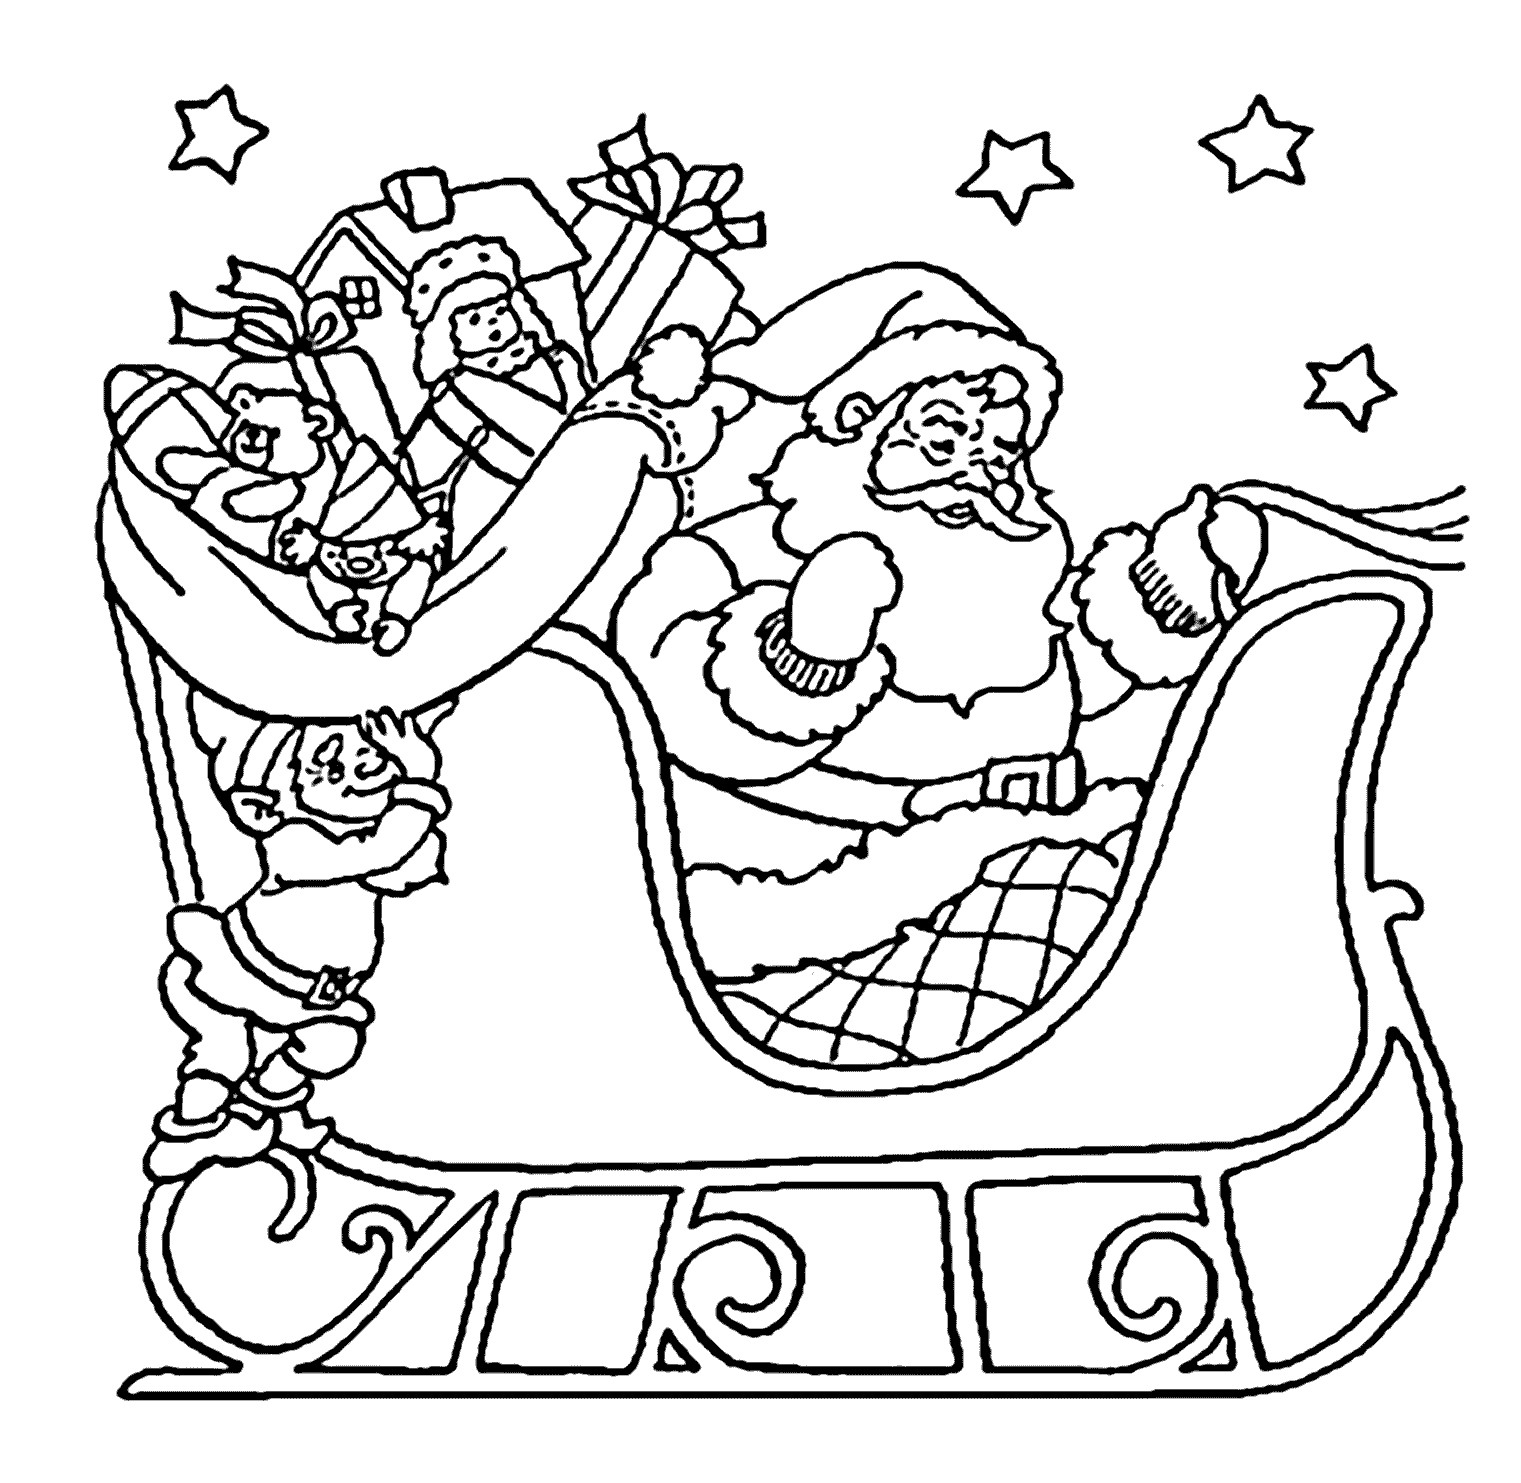 Santa And Rudolph Coloring Pages Santa Coloring Sheet Get Coloring Pages For You